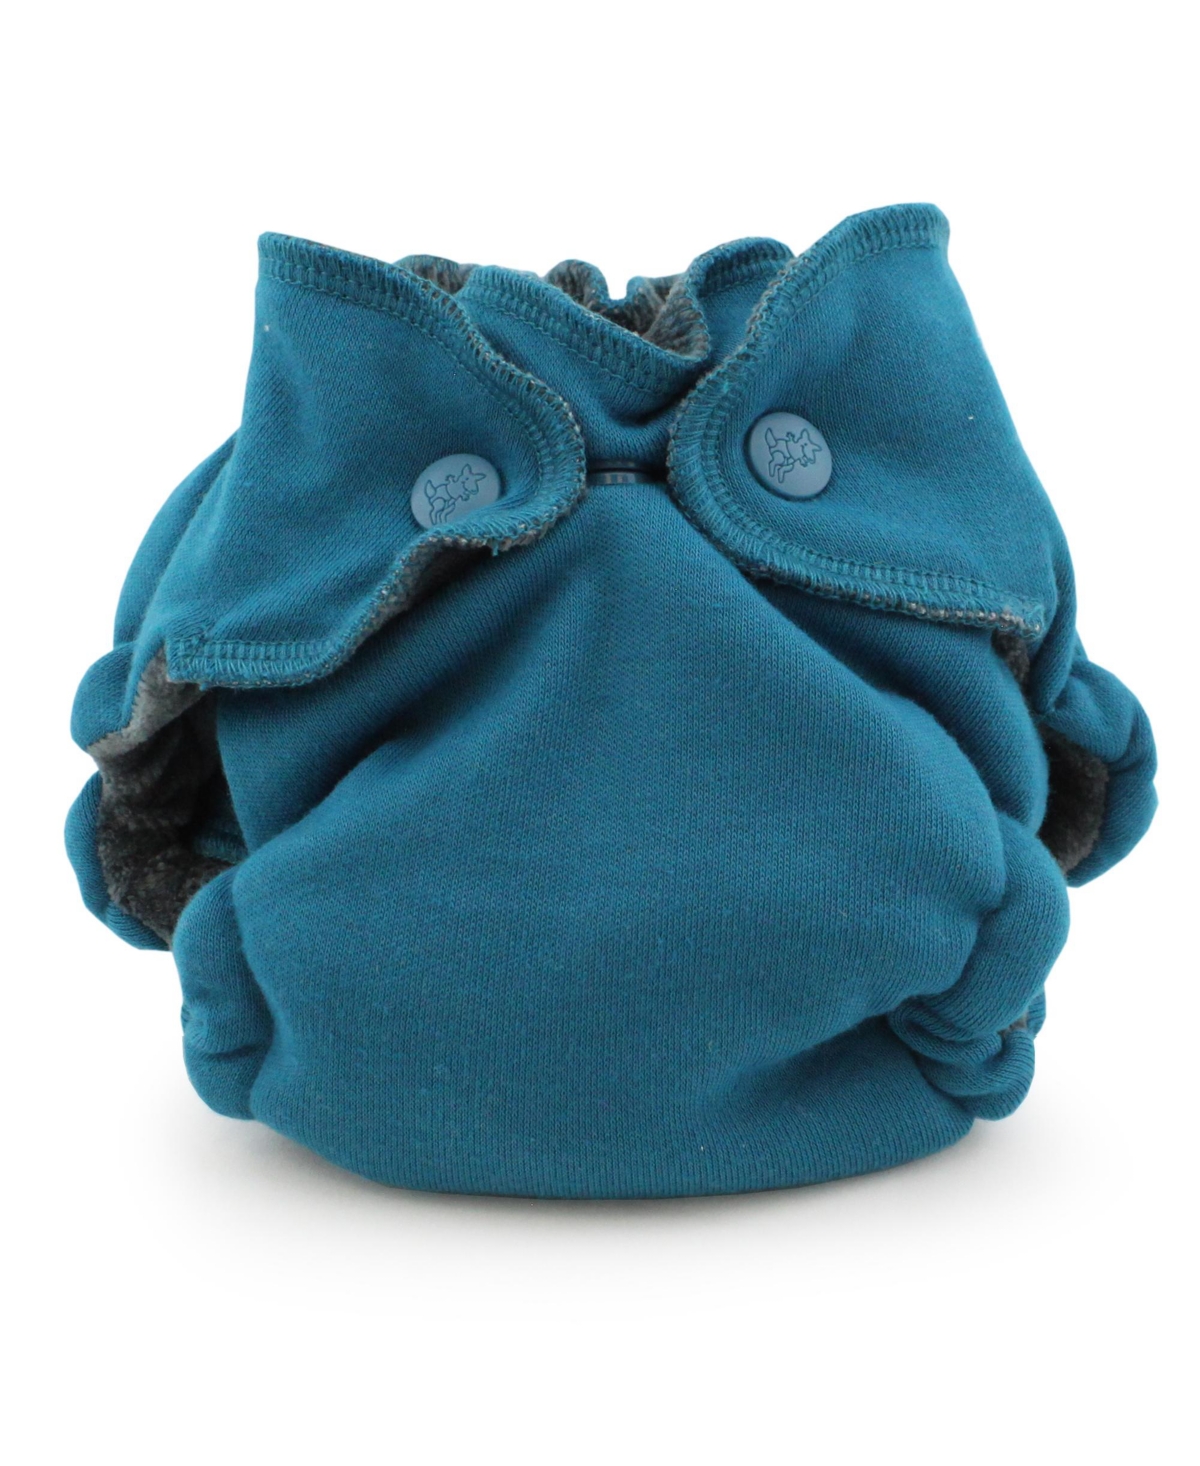 Kanga Care Babies' Ecoposh Obv (organic Rayon From Bamboo Velour) Newborn Aio (all-in-one) Fitted Cloth Diaper In Caribbean